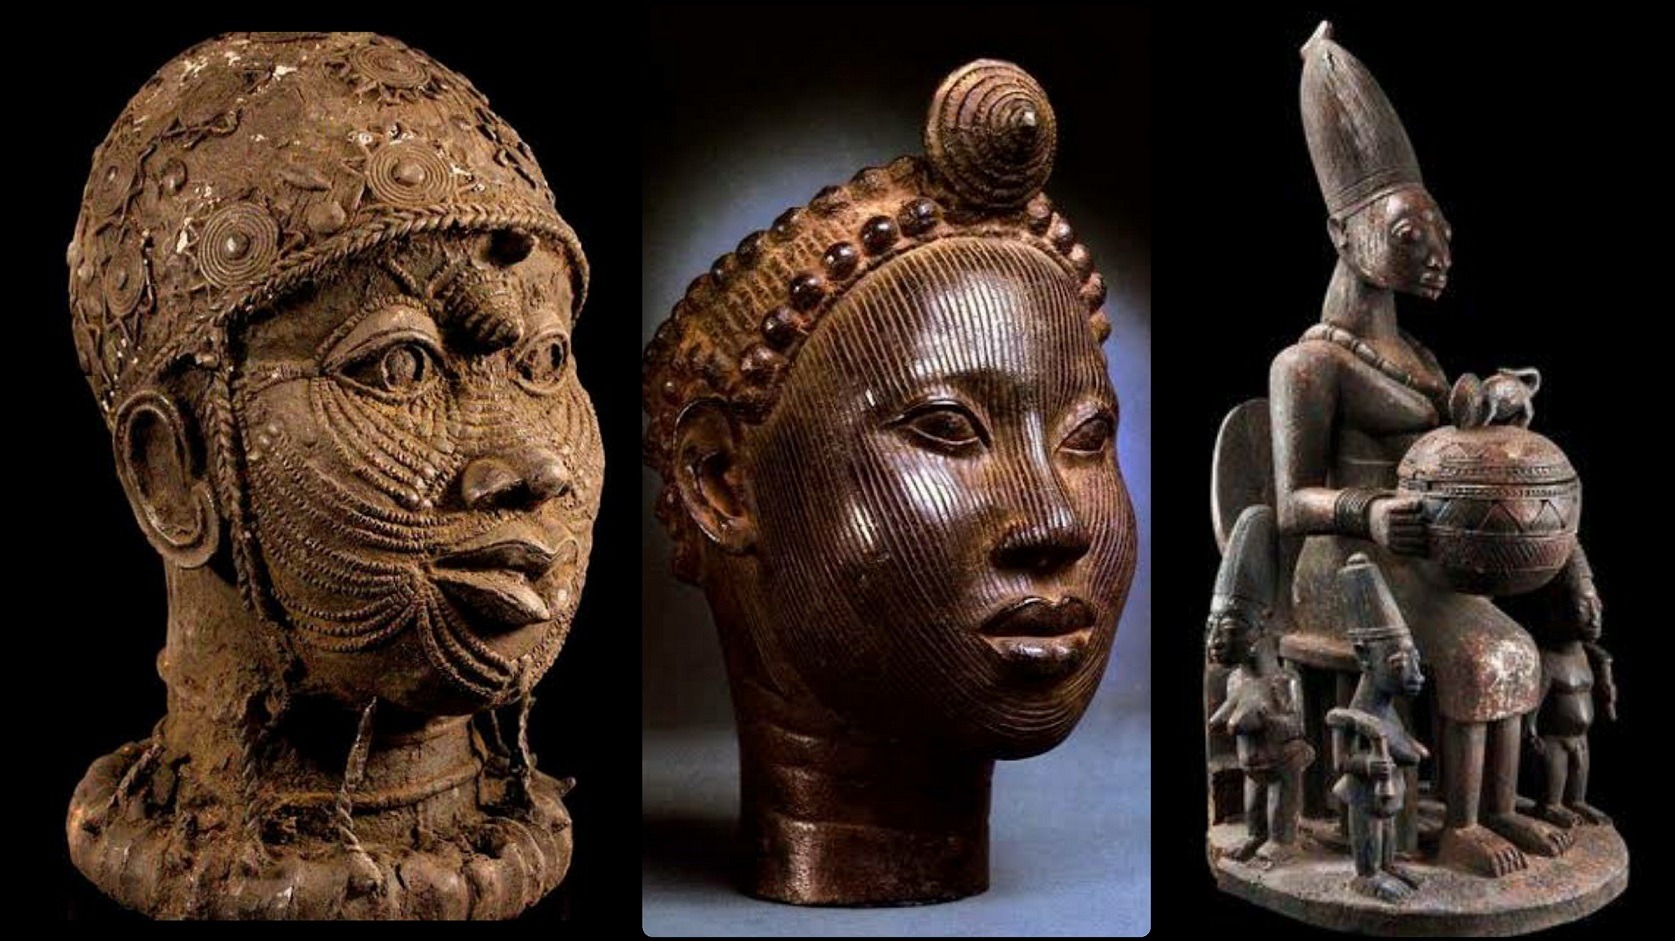 Story Of The Yoruba Metal Art Of The Mediaeval Age – A World Class Civilization